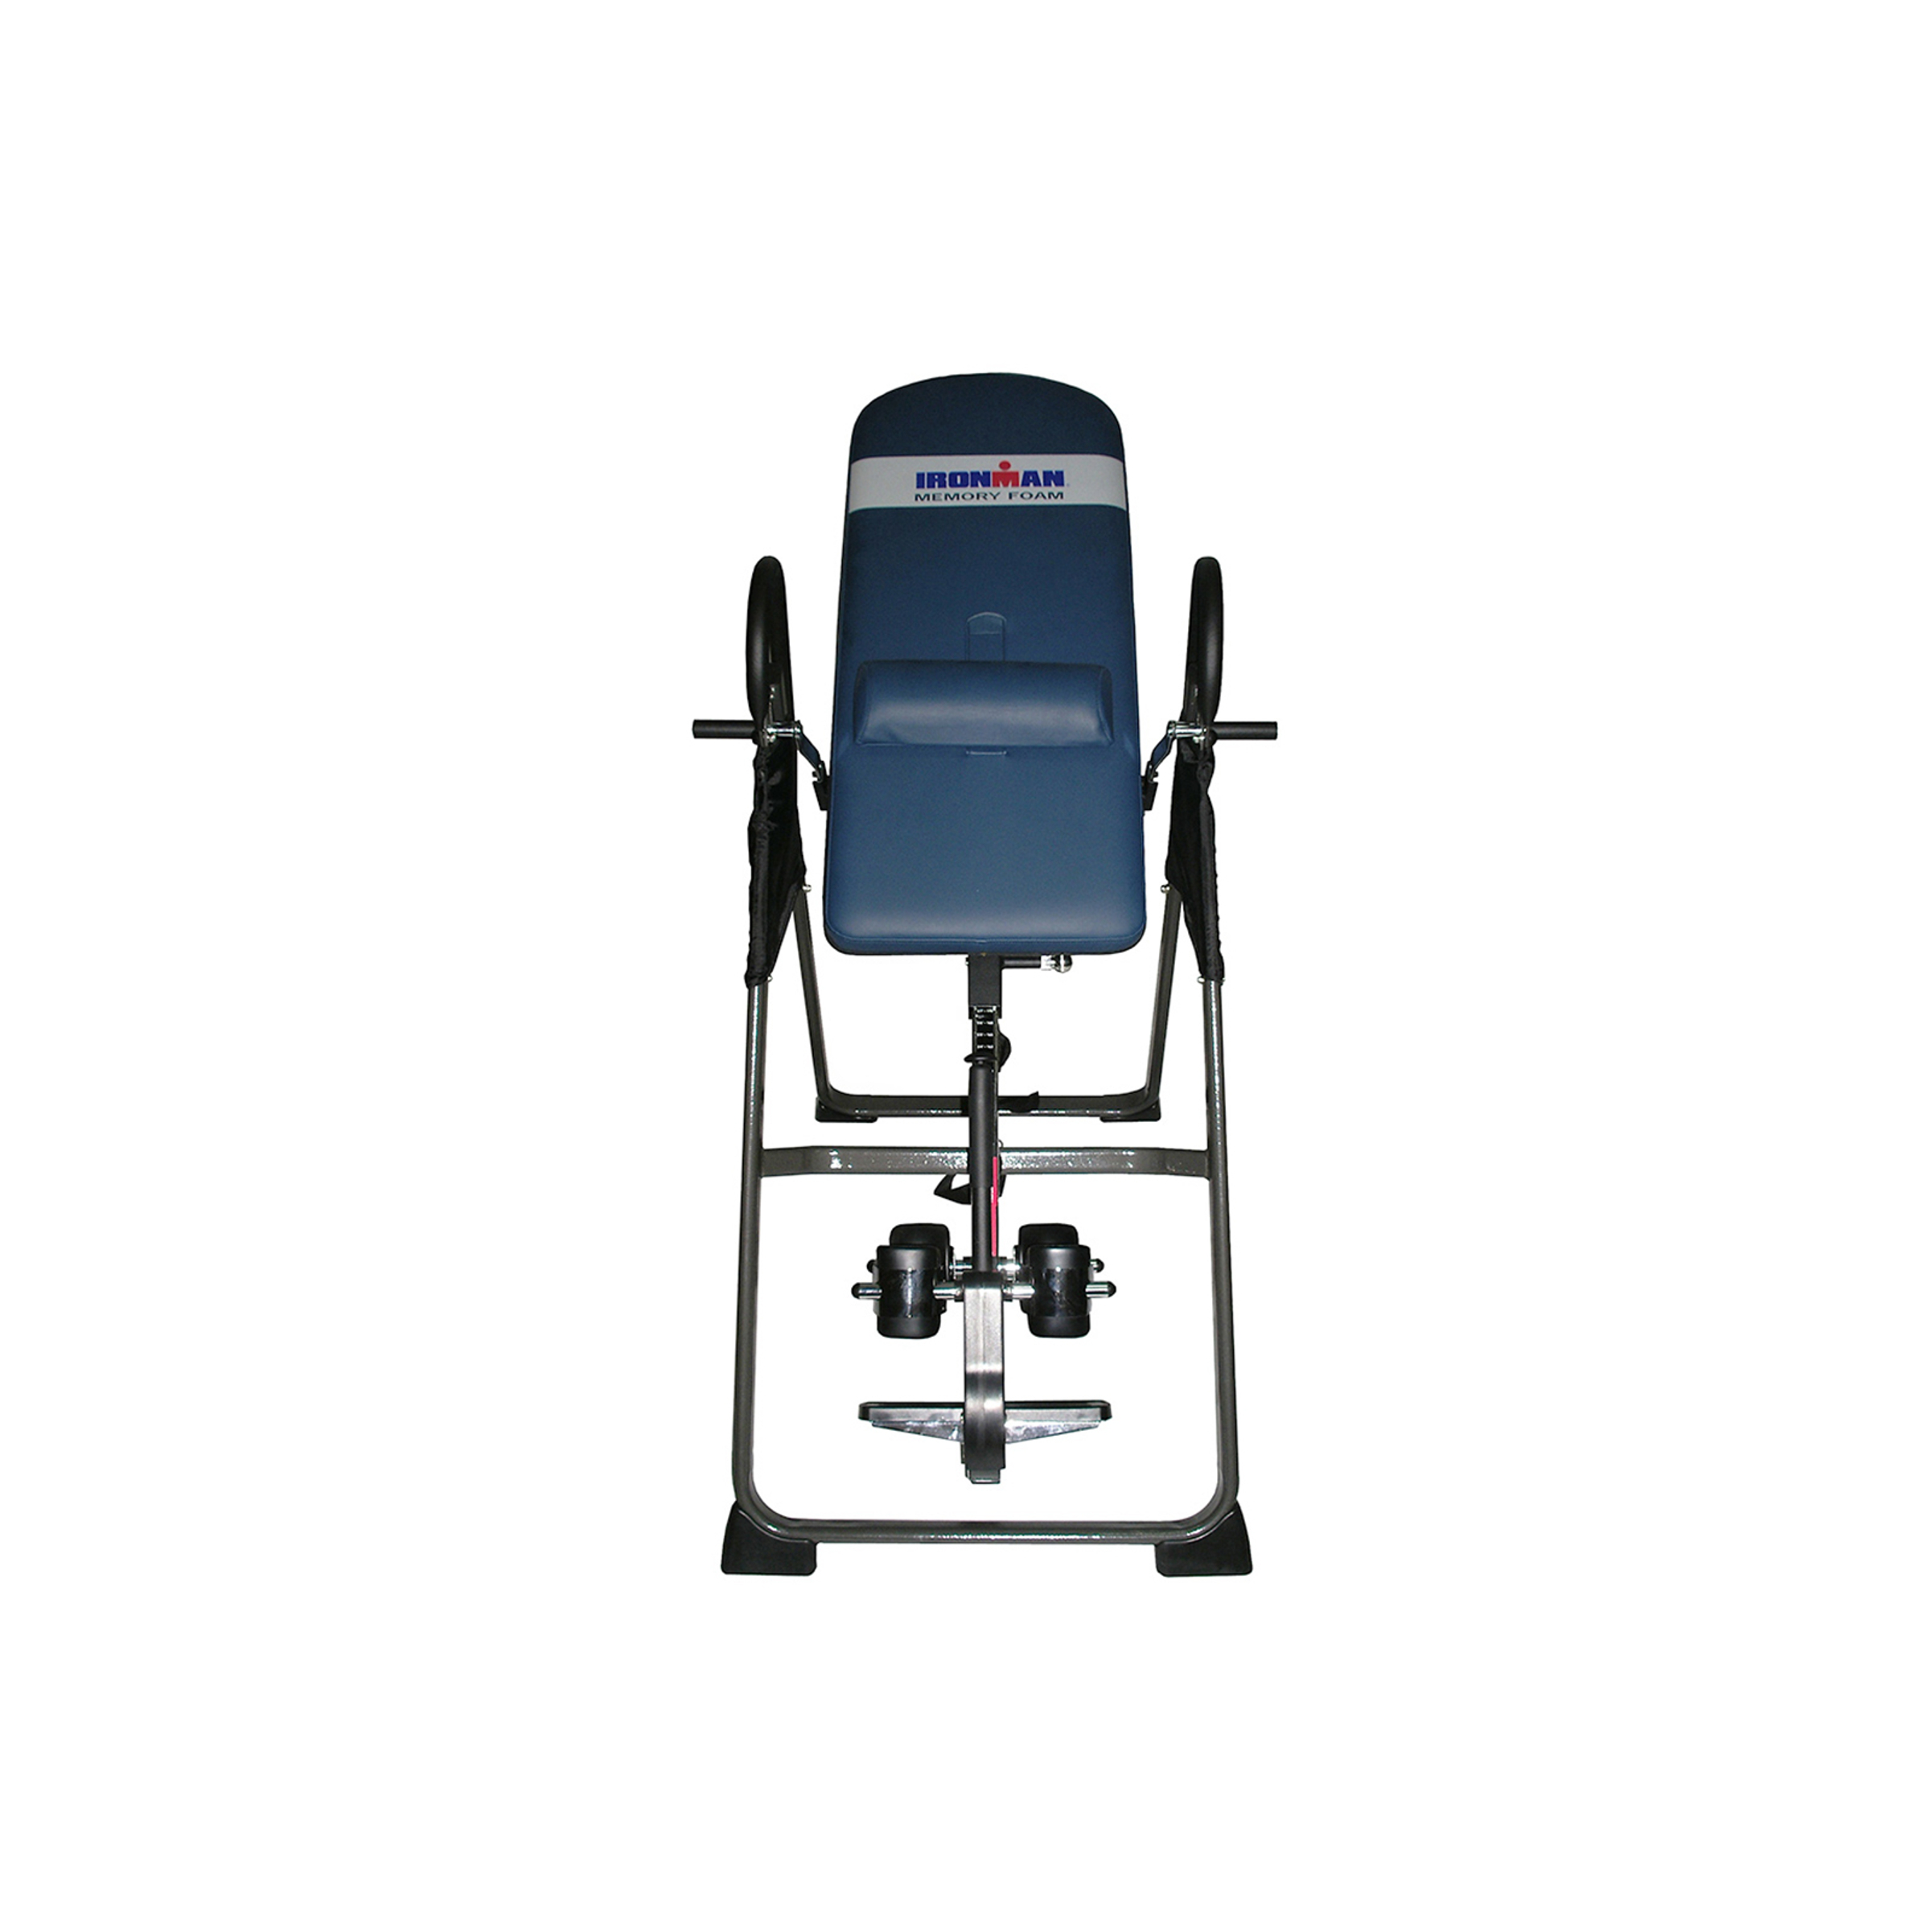 Ironman Inversion Table 5402 Manual | Decorations I Can Make